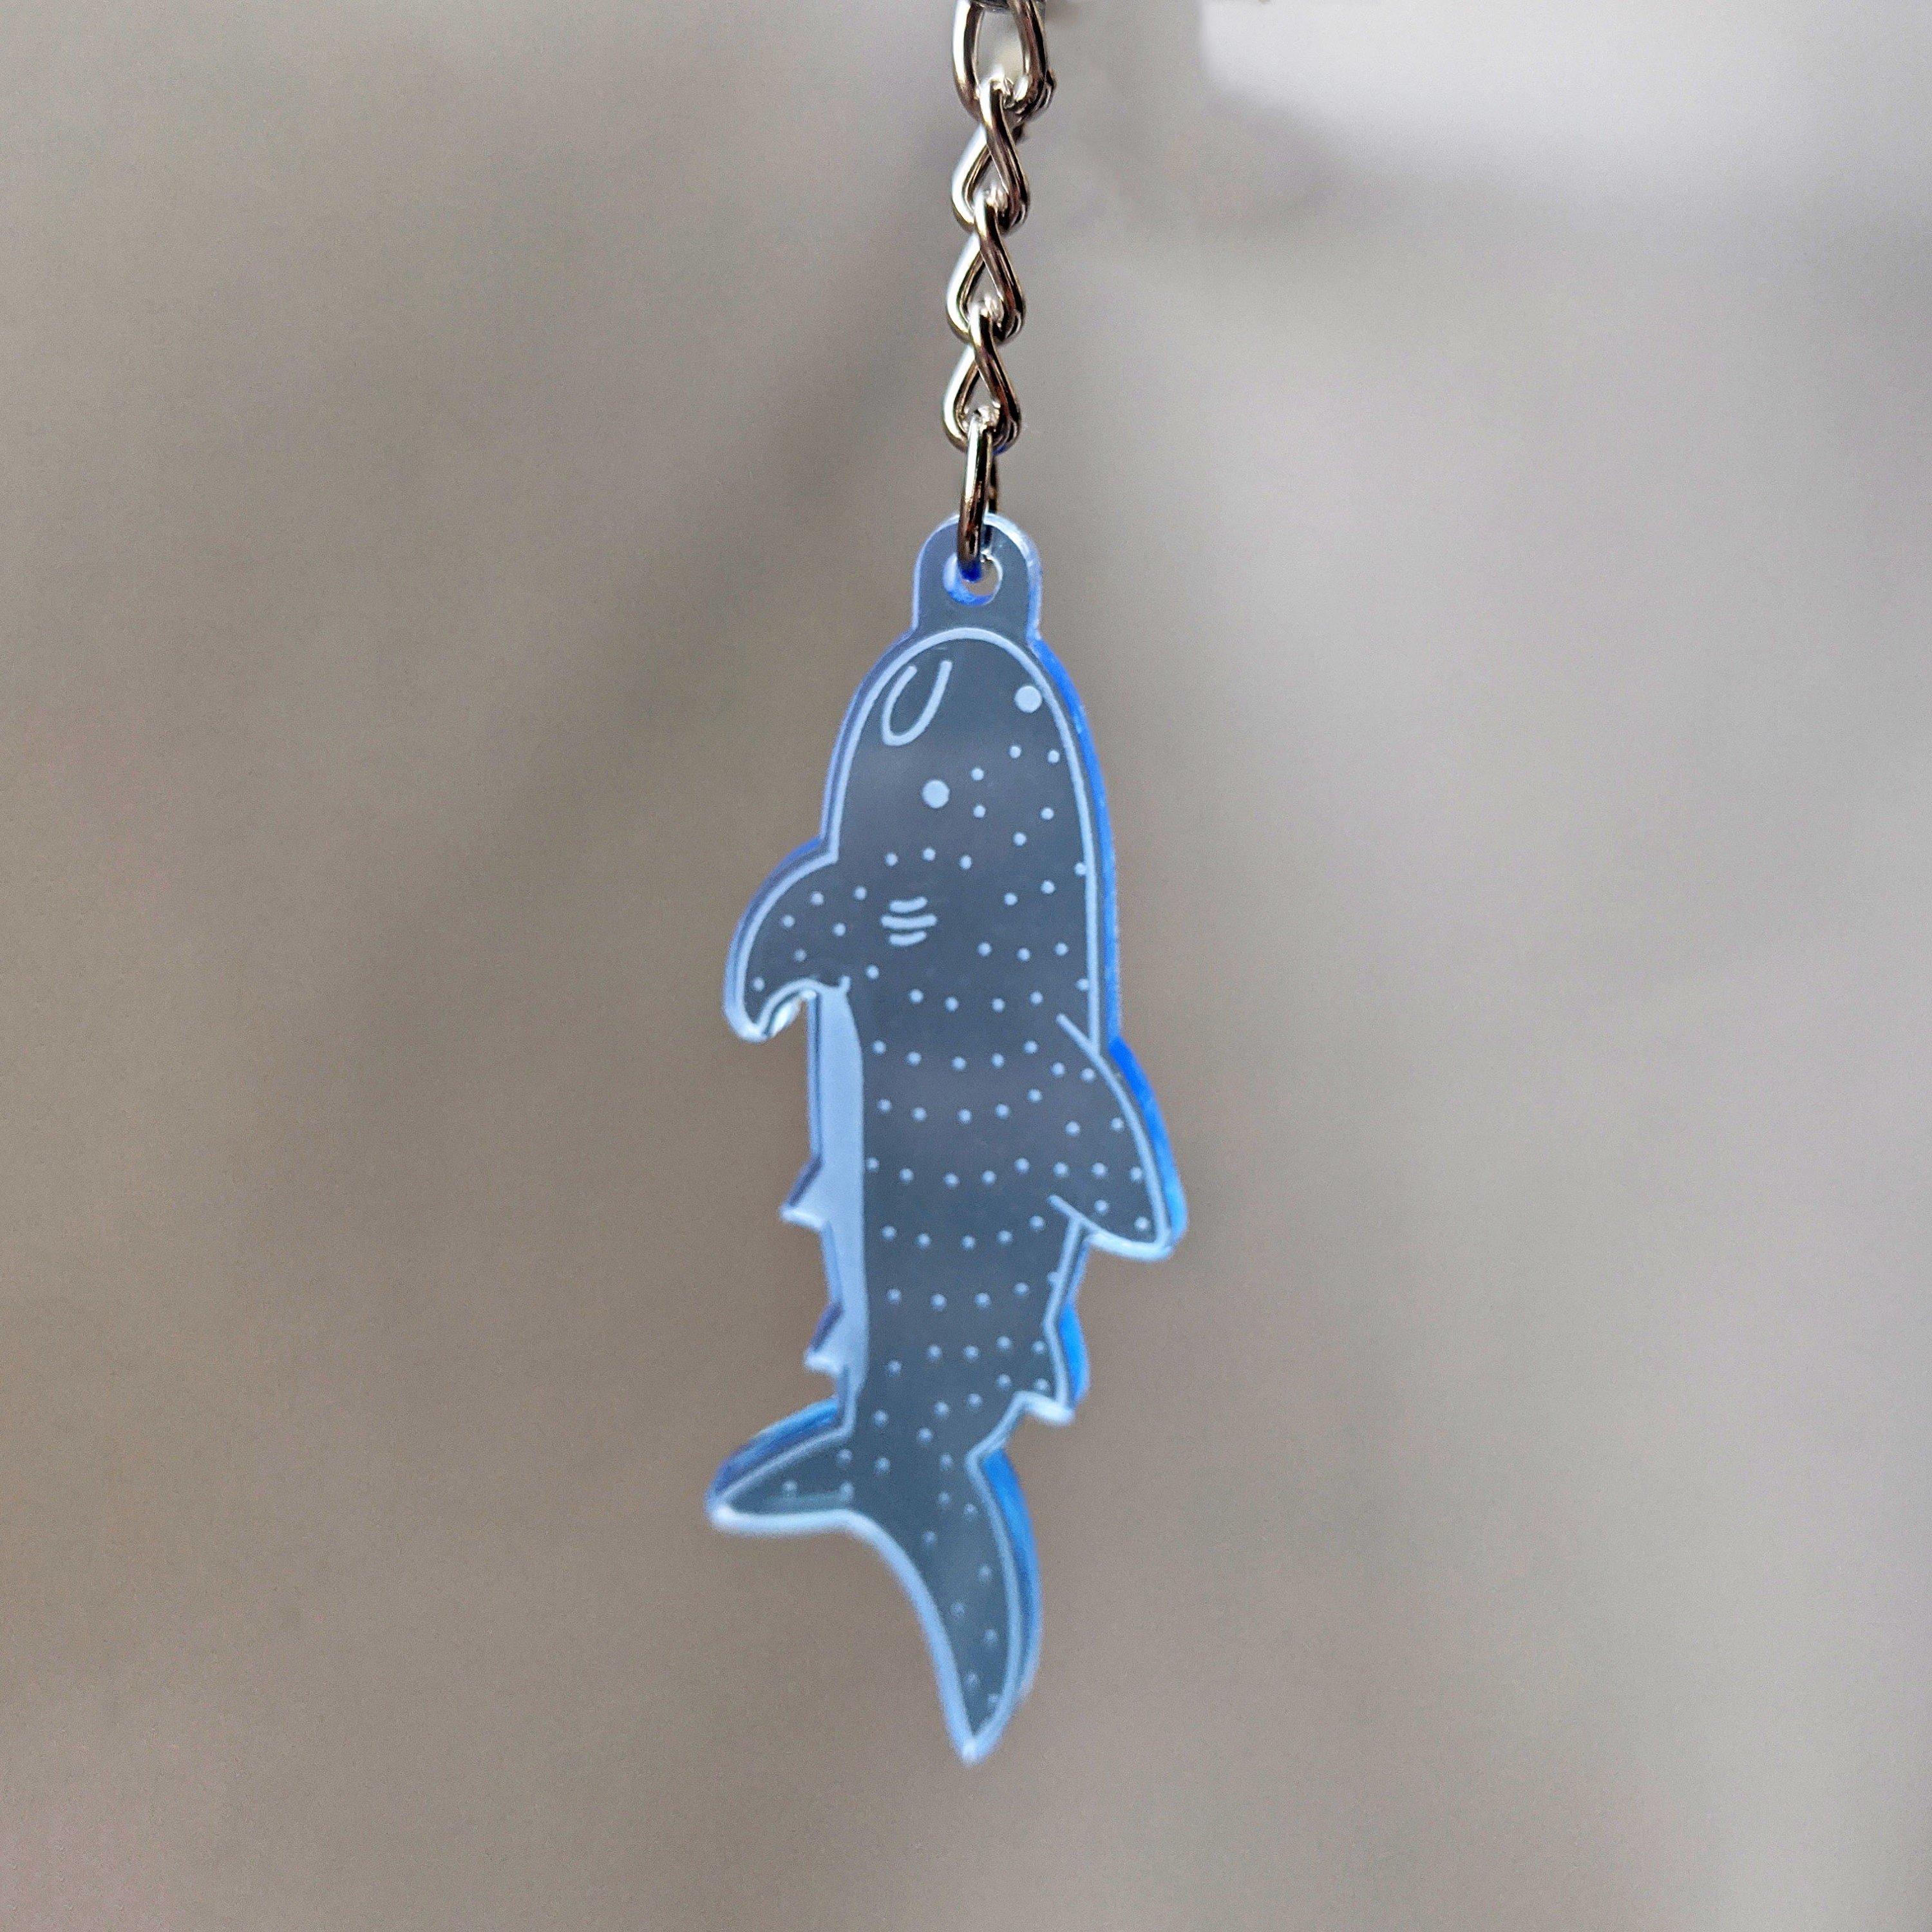 Whale Shark Jinbei Keychain Charm or Necklace Laser-cut | Etsy